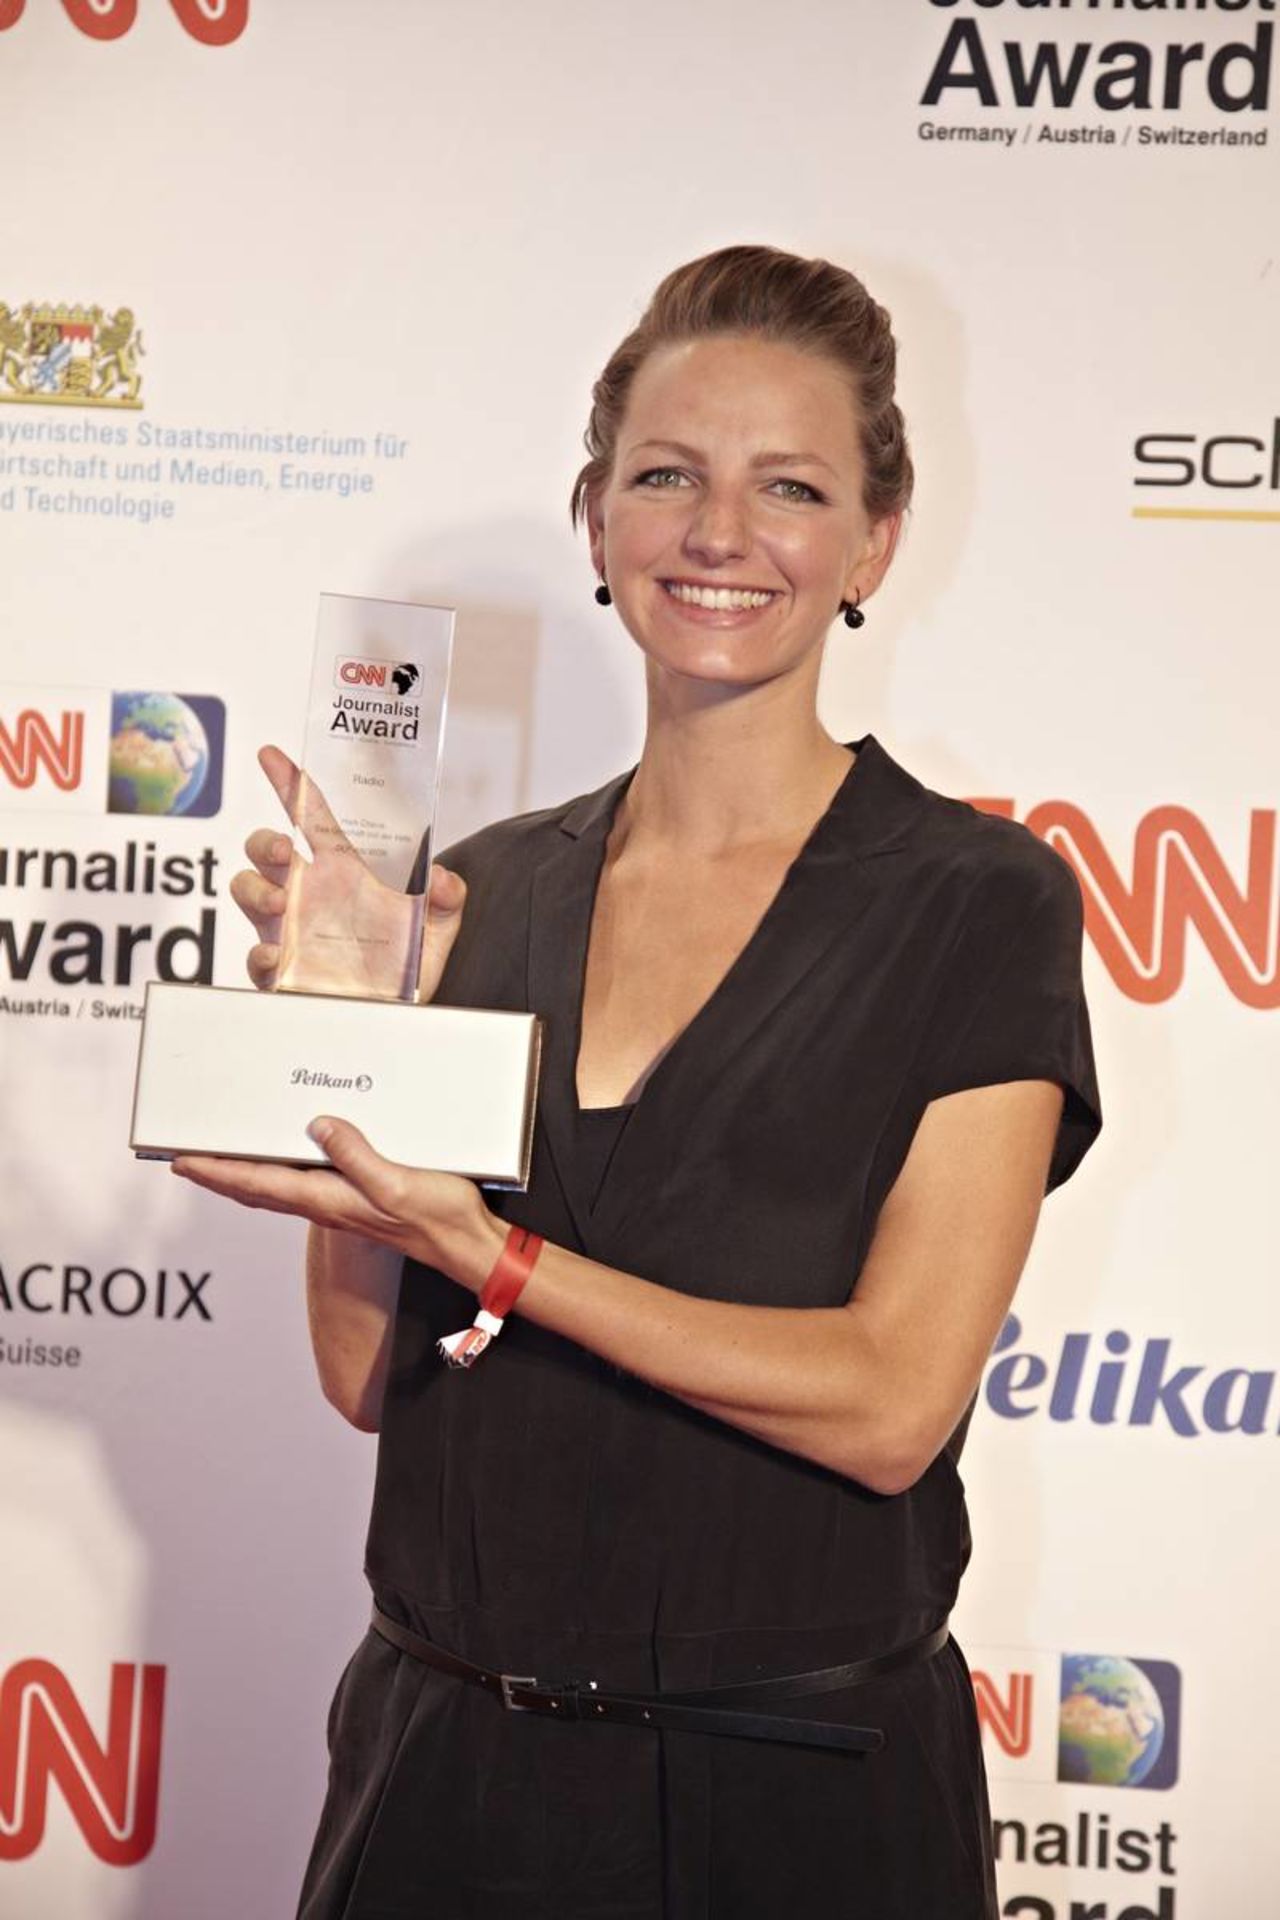 Jenny Marrenback was honored for best Radio piece at the 2014 CNN Journalist Awards in Munich, Germany. Judges praised her report for showcasing "the other side of the coin in the NGO business."